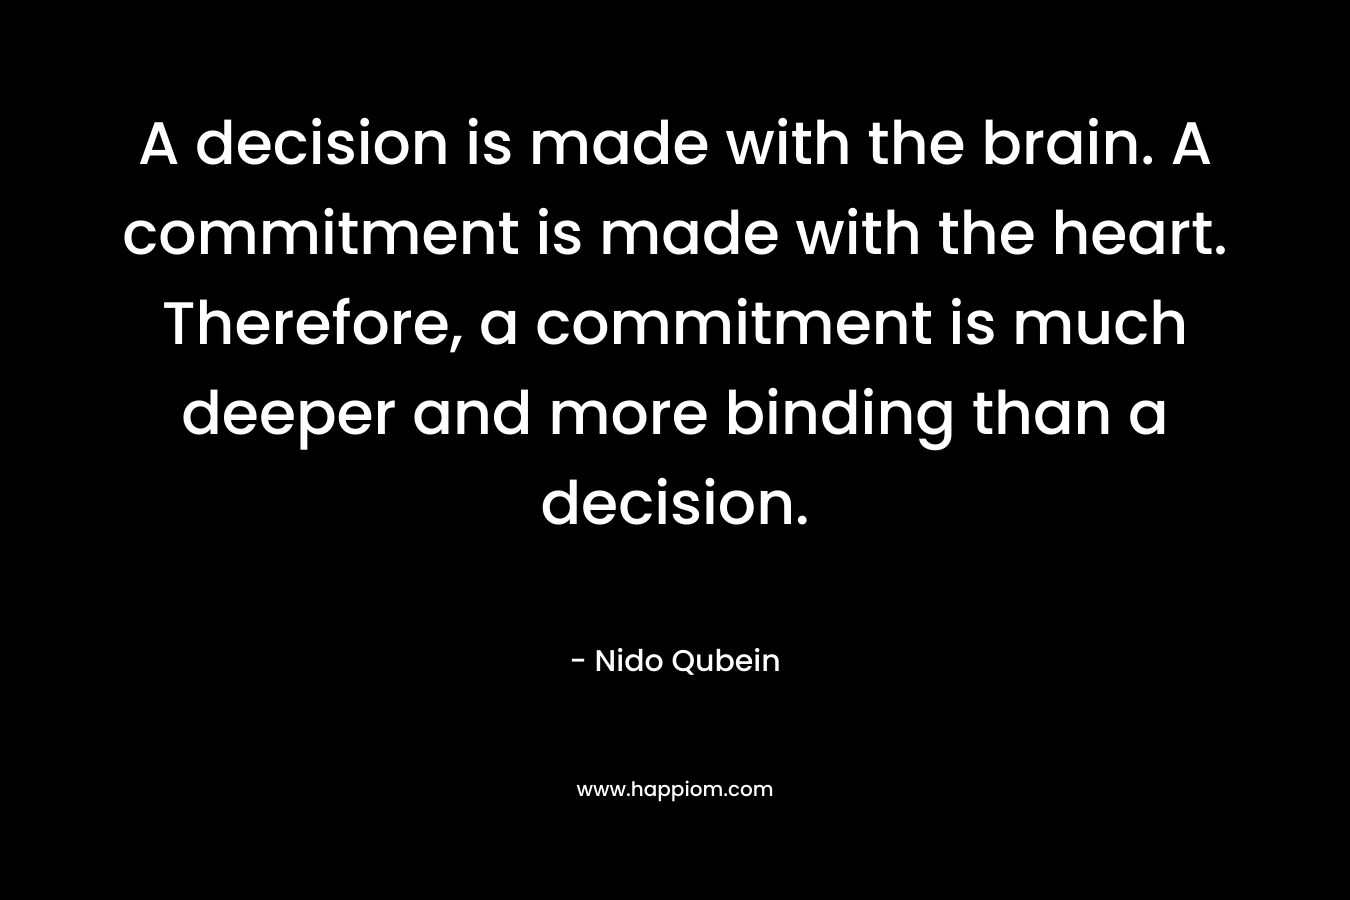 A decision is made with the brain. A commitment is made with the heart. Therefore, a commitment is much deeper and more binding than a decision. – Nido Qubein